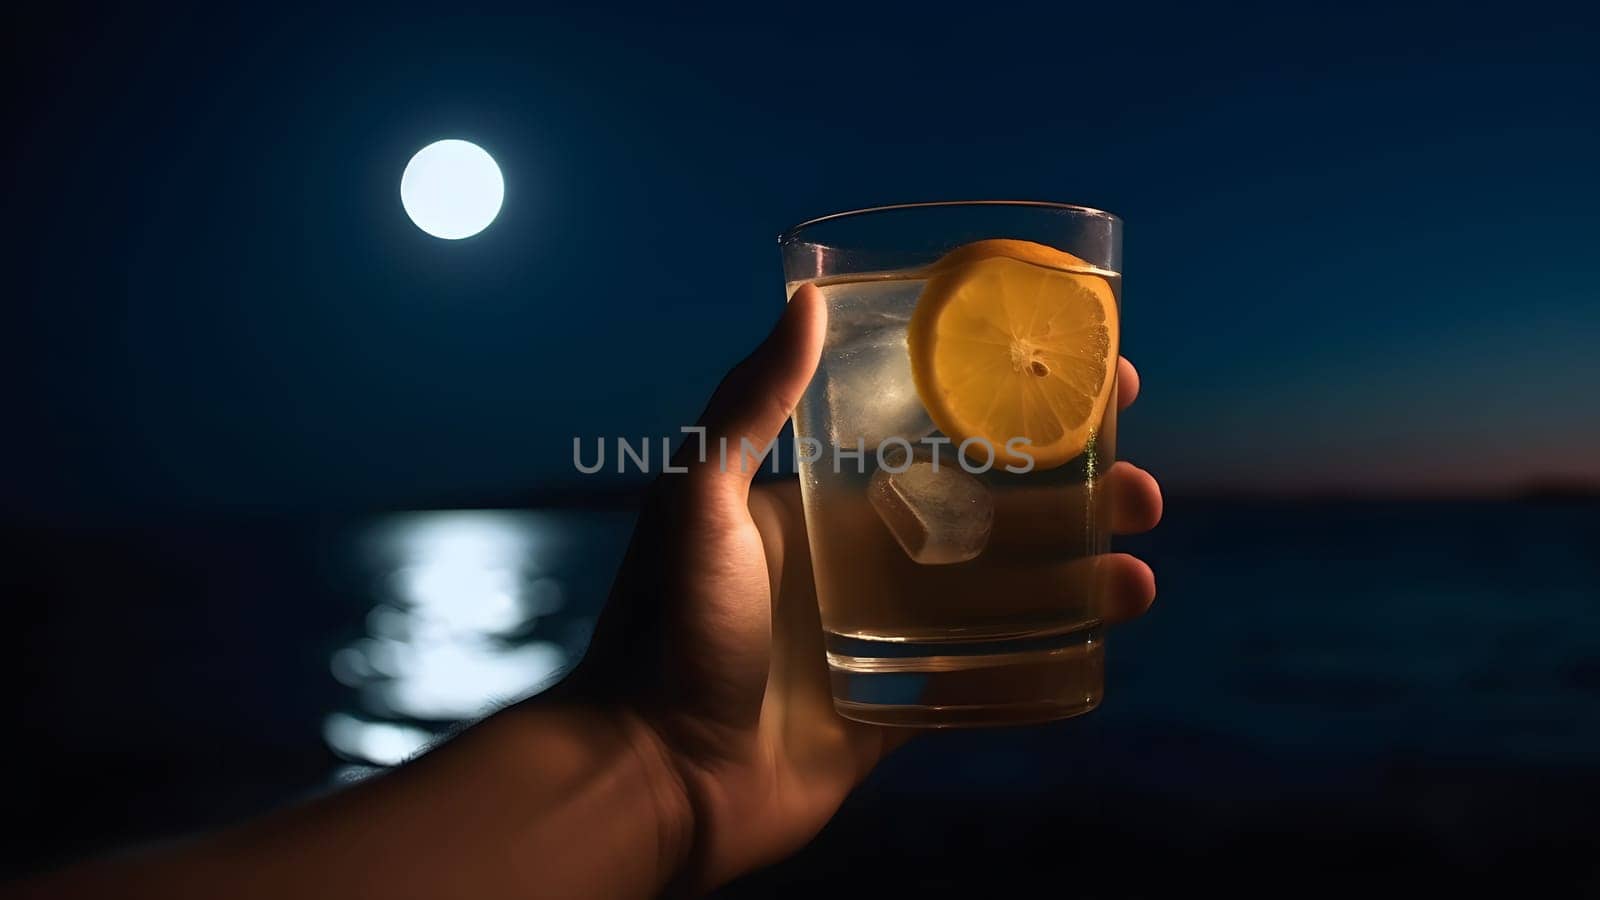 caucasian hand holding glass of cocktail on blurry sea horizon background at full moon night. Neural network generated in May 2023. Not based on any actual person, scene or pattern.